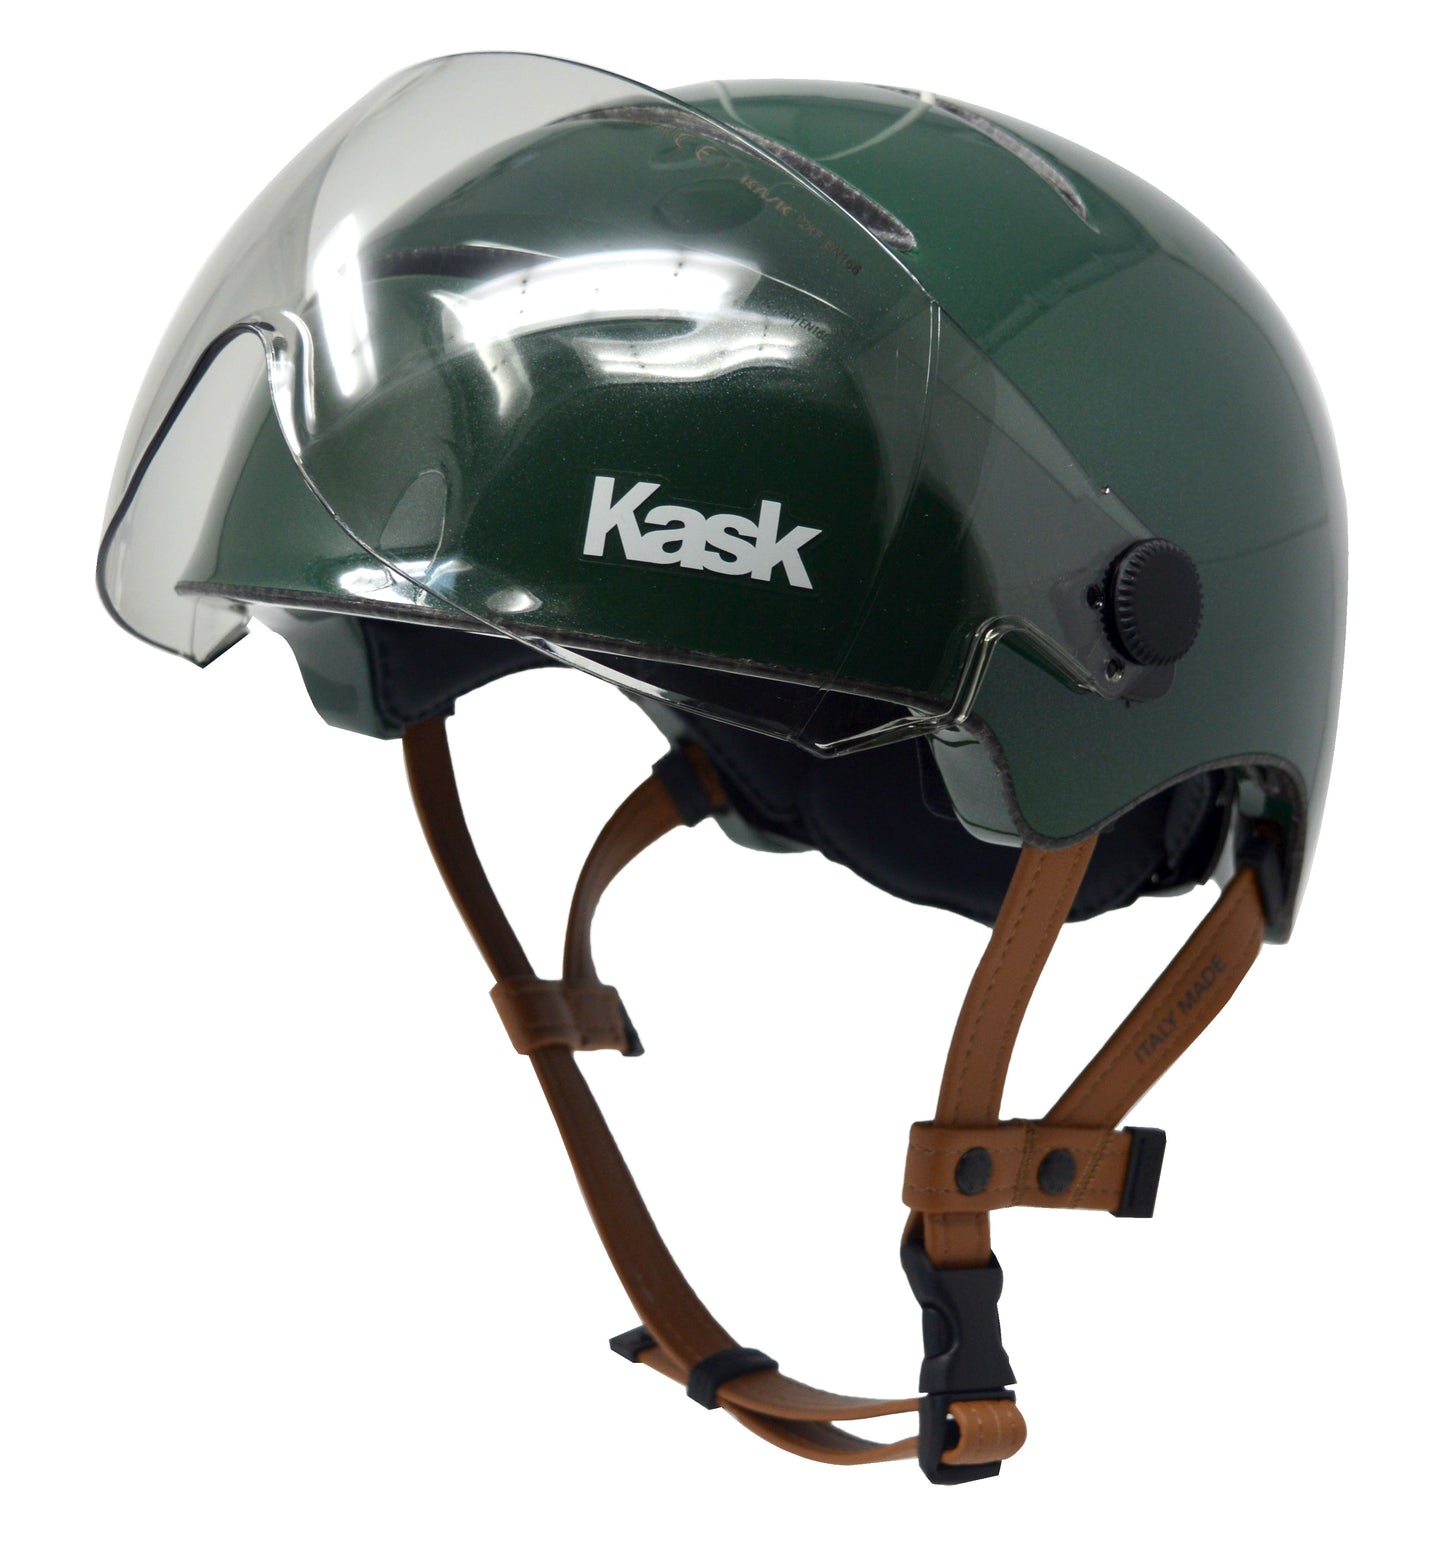 Casque KASK LifeStyle english green